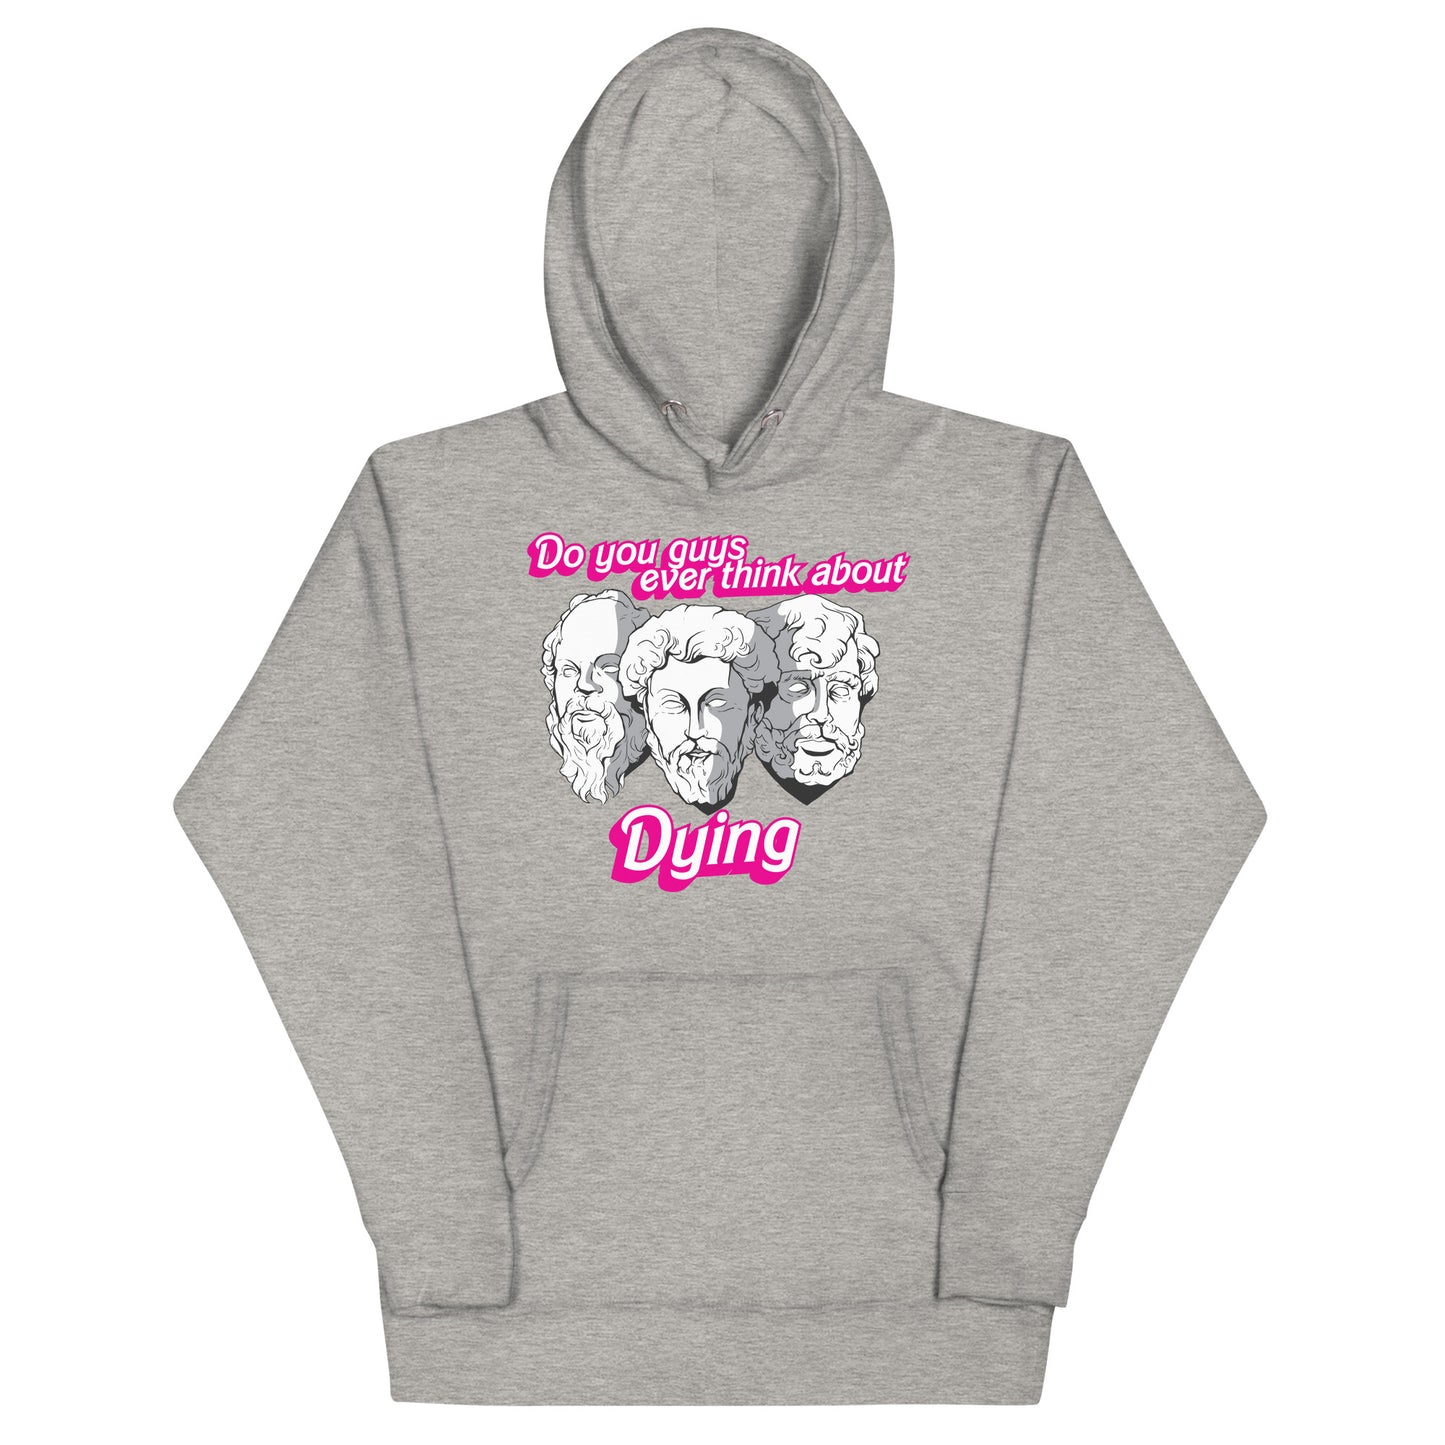 Do You Guys Ever Think About Dying (Philosophers) Unisex Hoodie